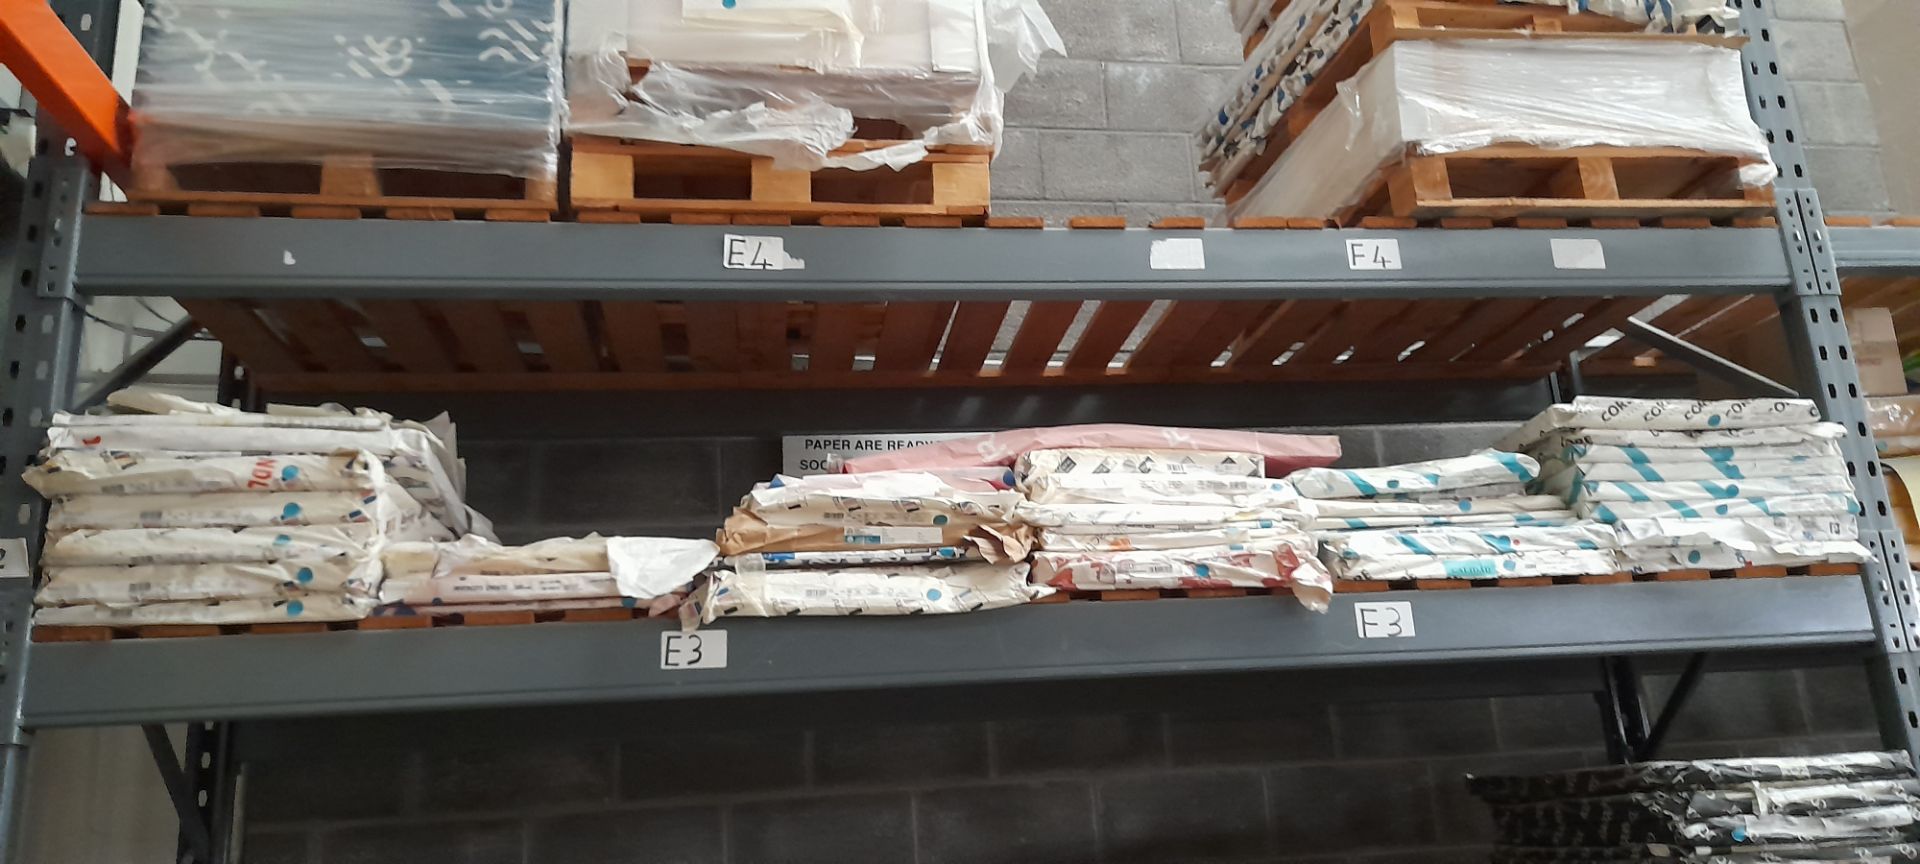 Large quantity of paper stock to racking - Image 12 of 13